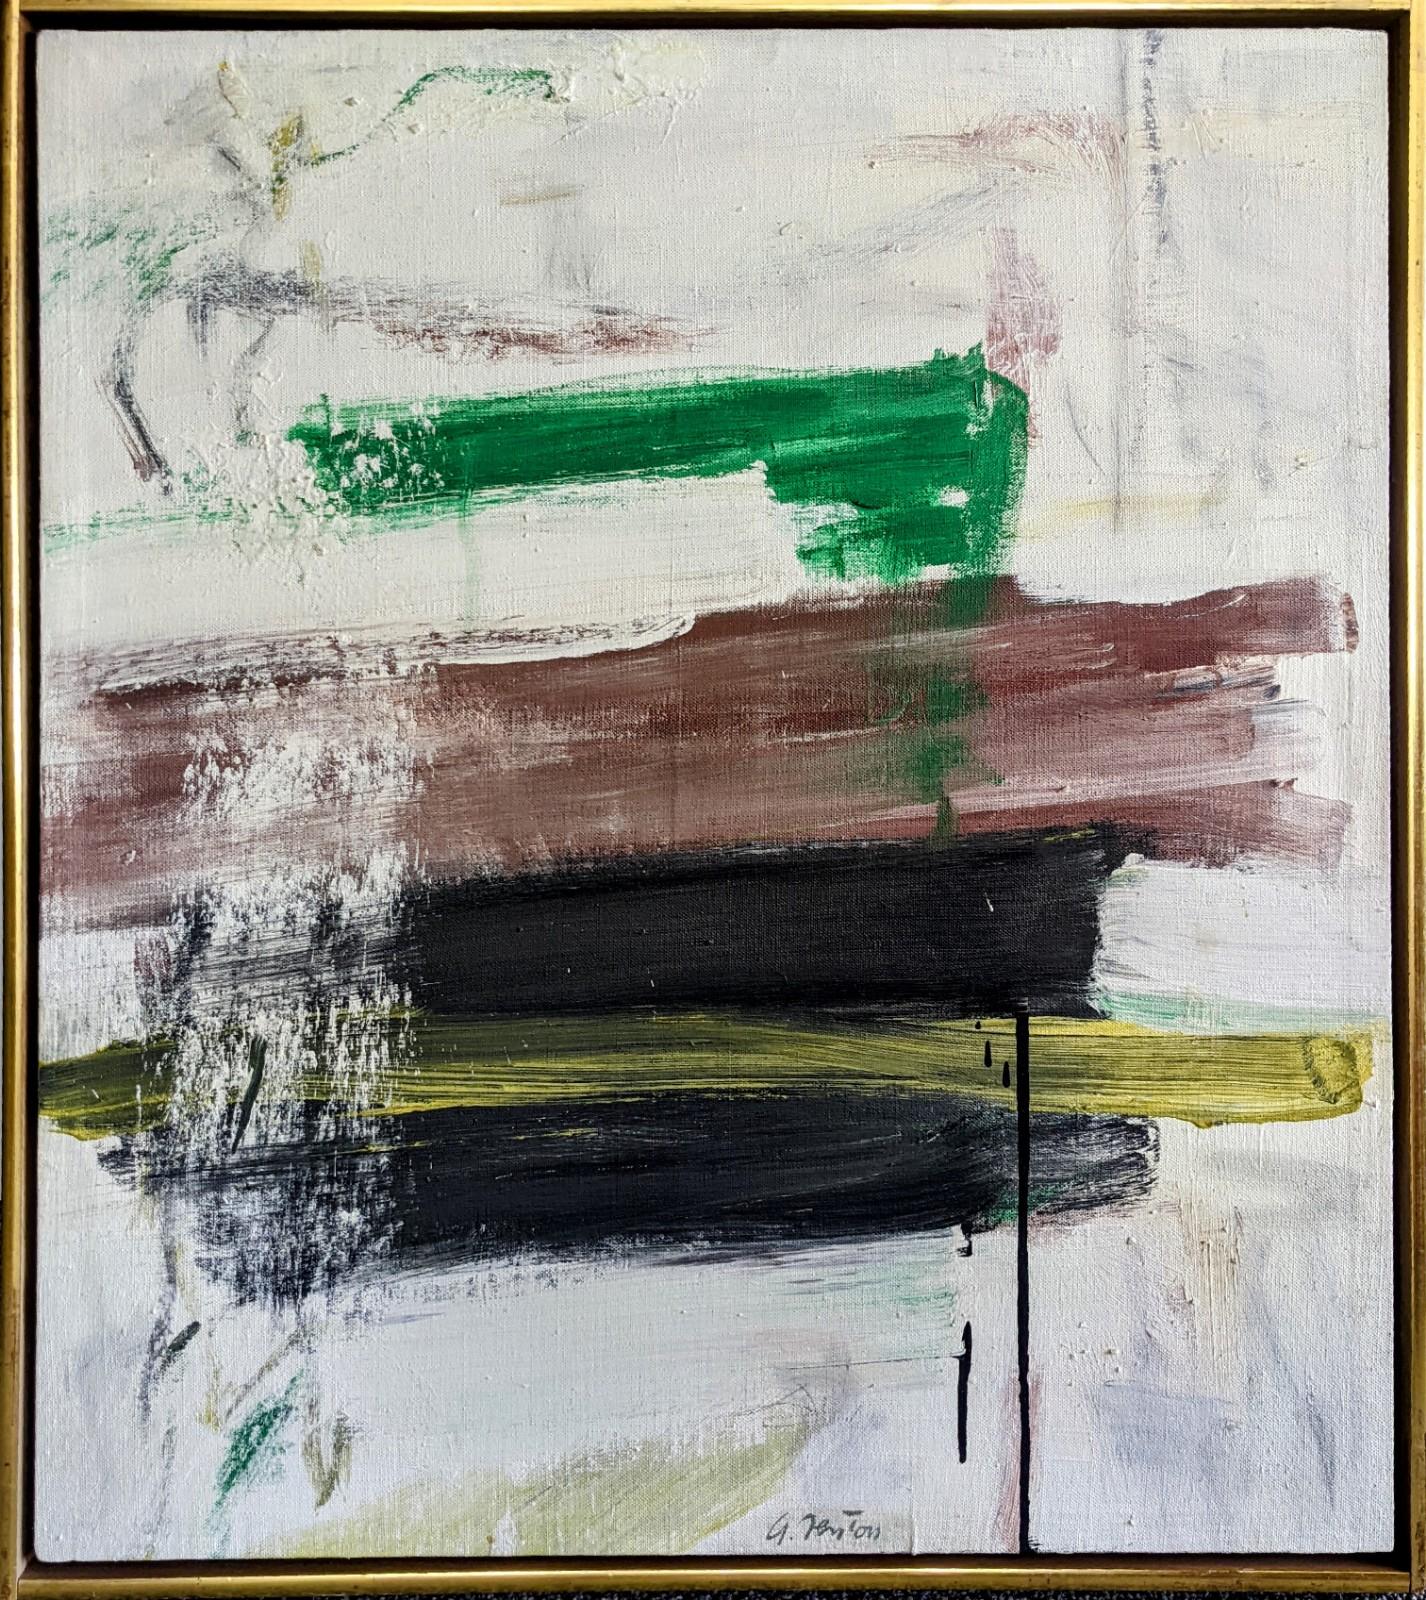 Alan Fenton (1927 - 2000)
Untitled, 1958
Oil on artist's board
28 3/4 x 25 1/2 inches
Signed and dated on the reverse

Fenton's quiet and contemplative nonobjective paintings and drawings were widely recognized for their demanding yet understated